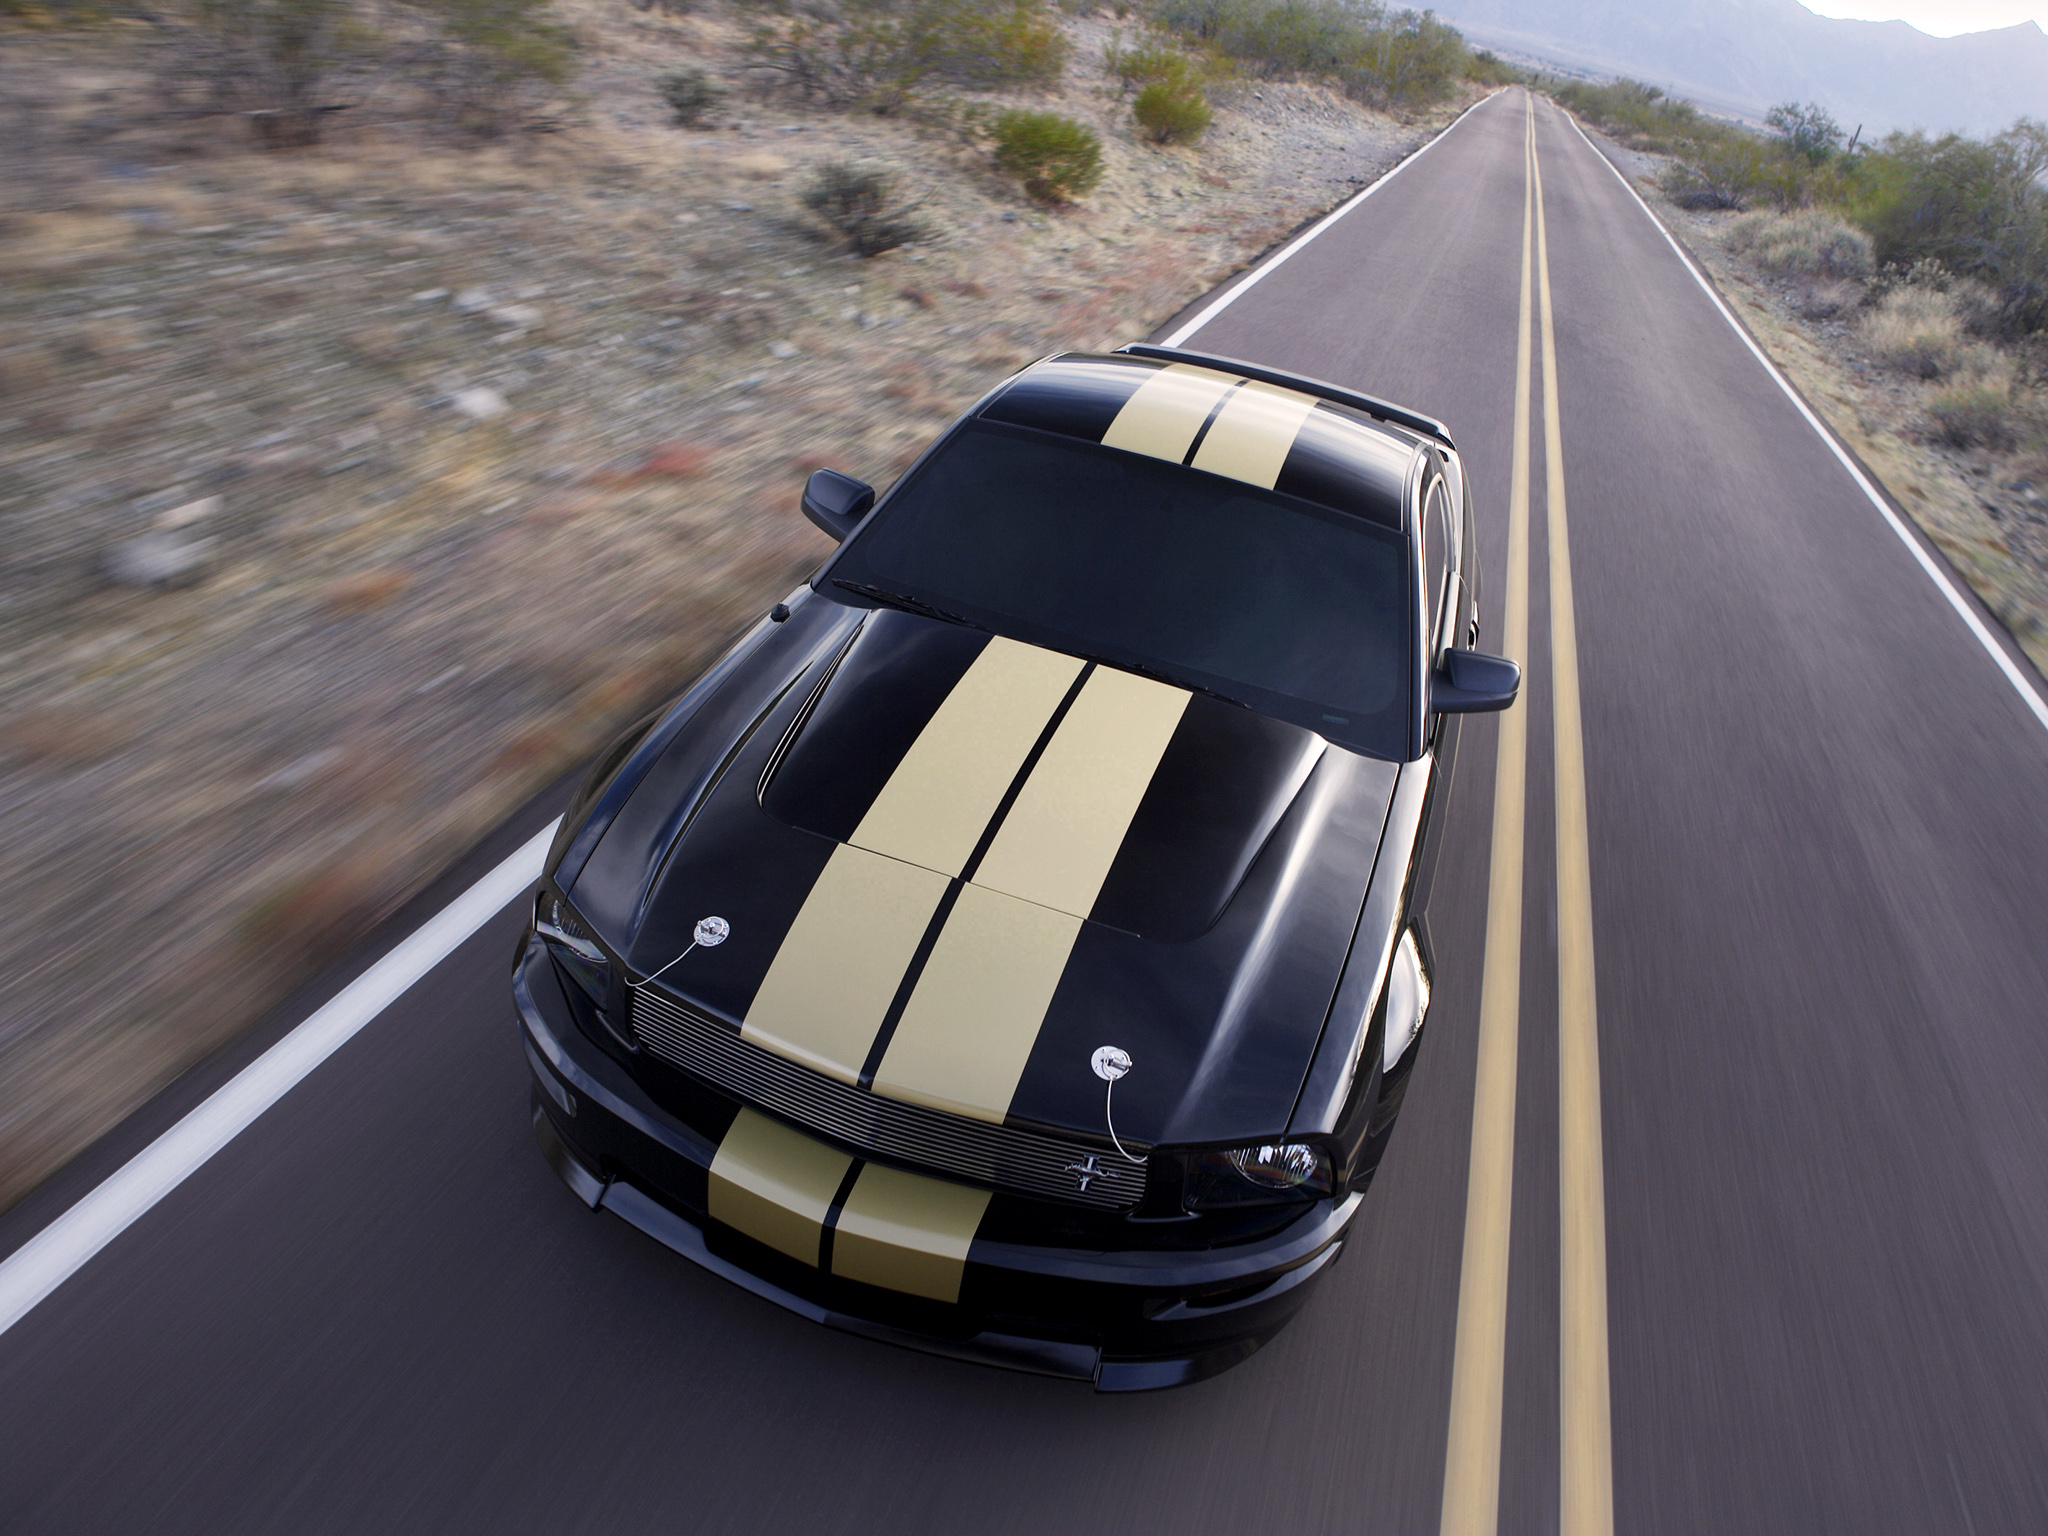 2006, Shelby, Gt h, Ford, Mustang, Muscle Wallpaper